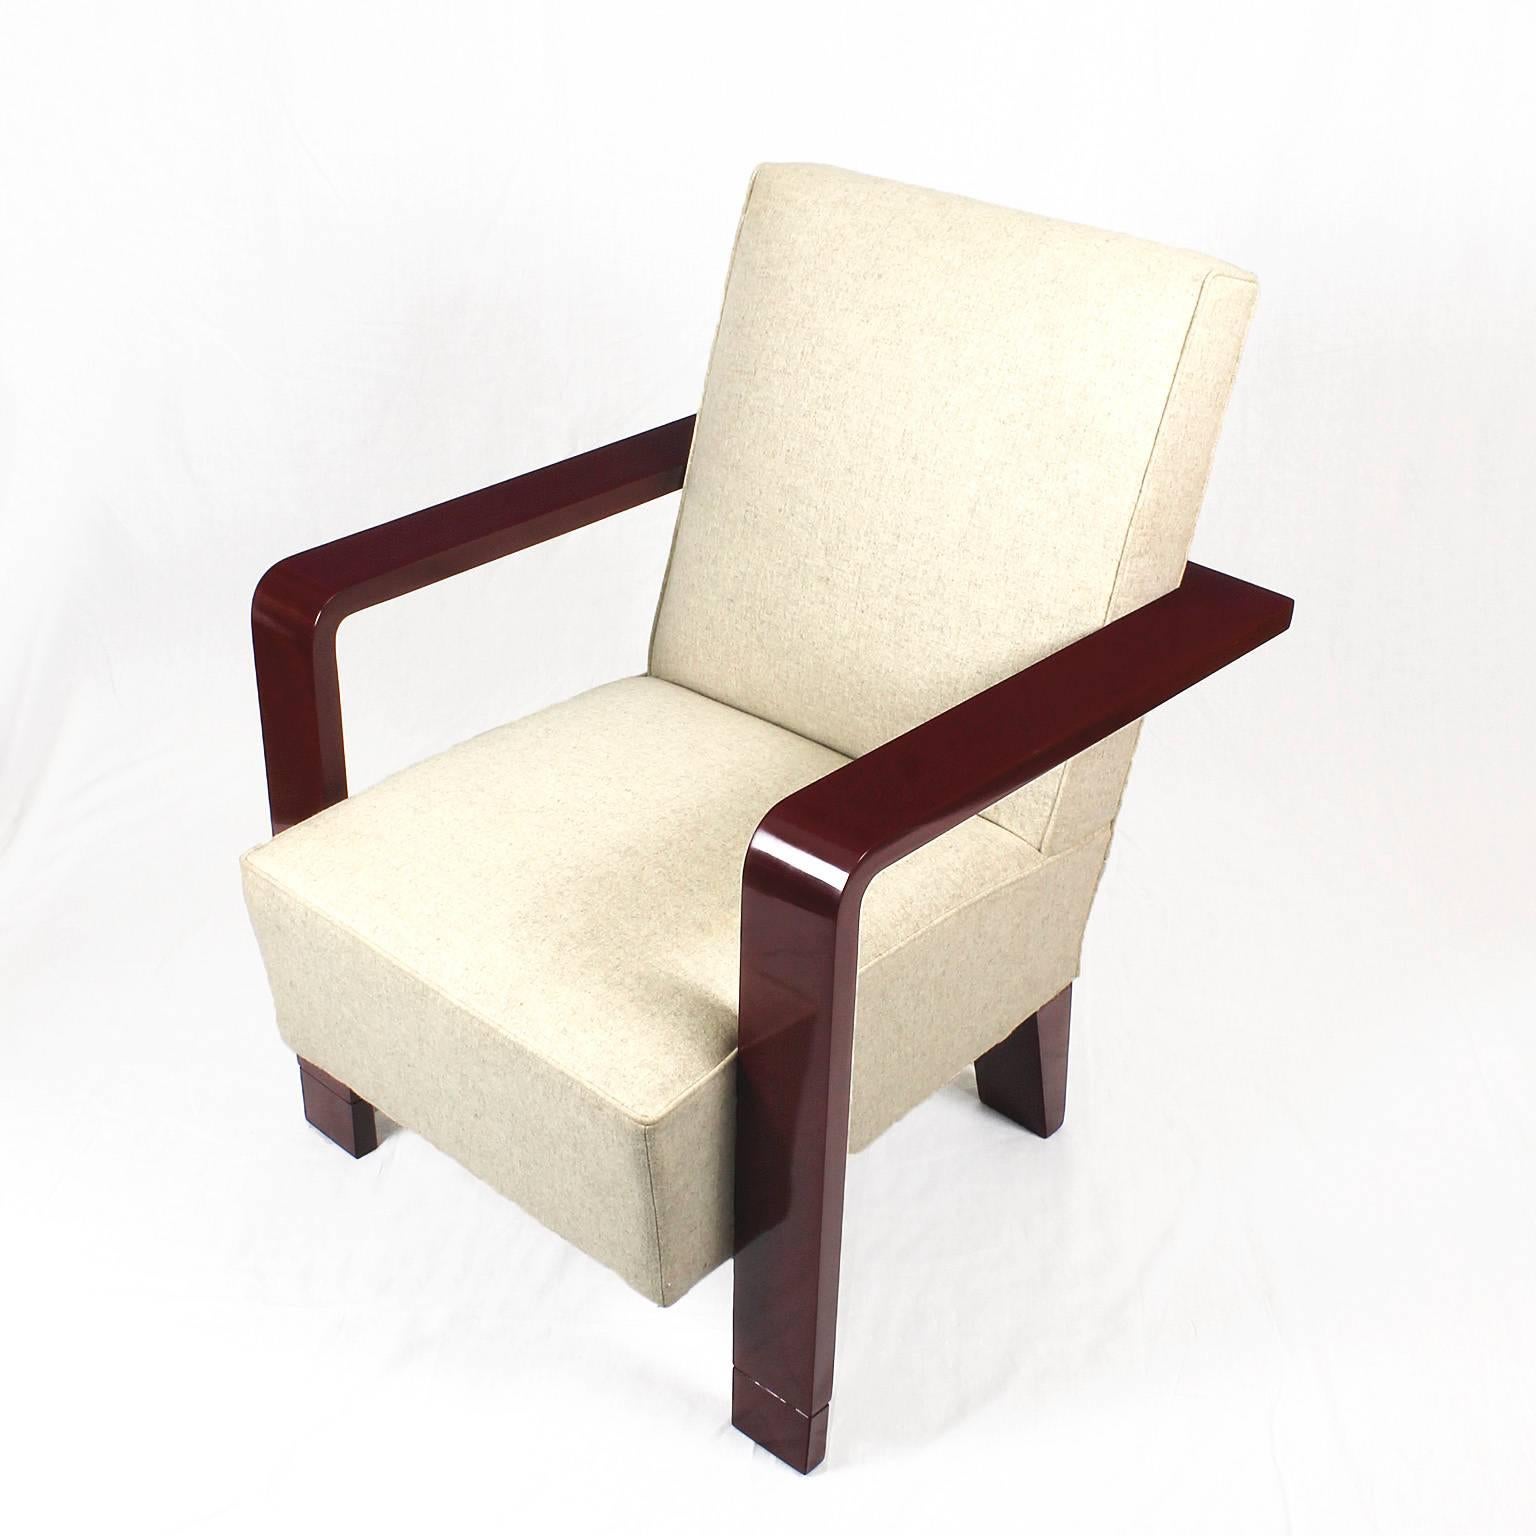 1930s Pair of Art Deco Cubist Armchairs, Lacquered Beech, Off White Wool Belgium im Zustand „Gut“ in Girona, ES